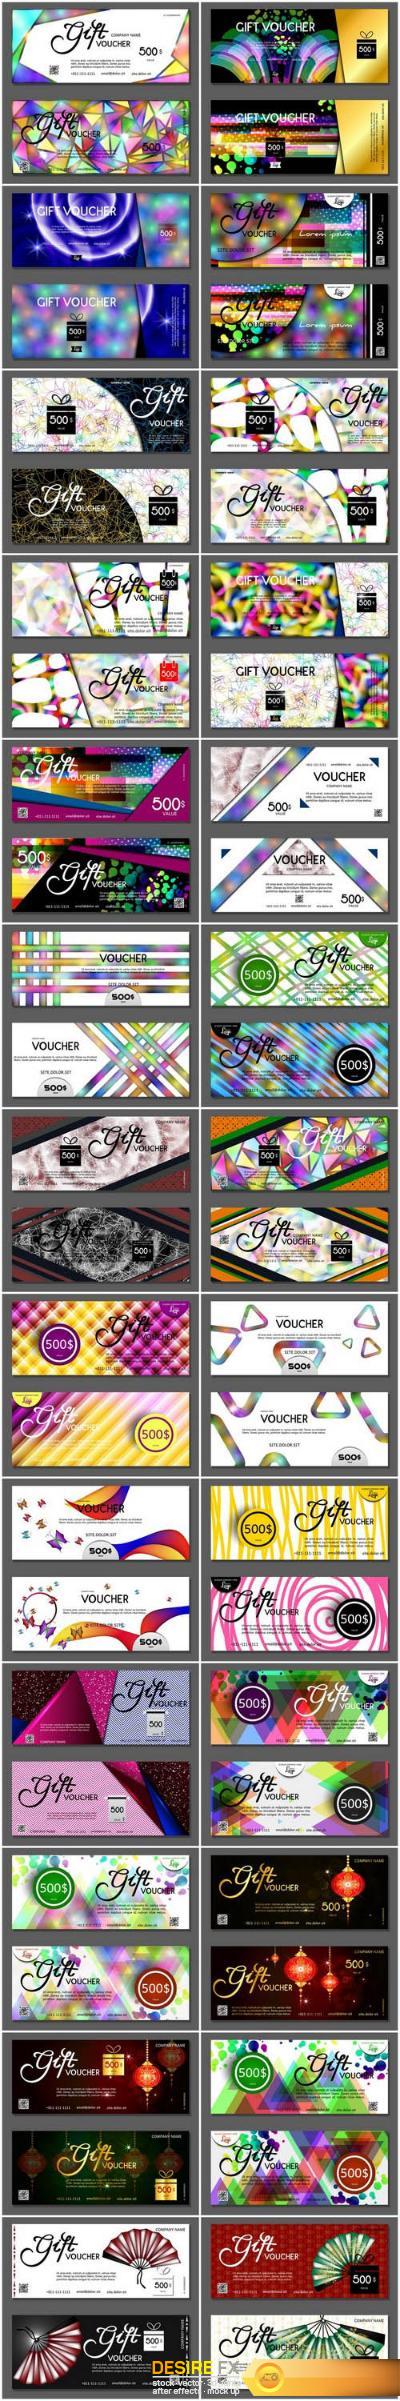 Collection of gift cards and vouchers 5 - Set of 26xEPS Professional Vector Stock